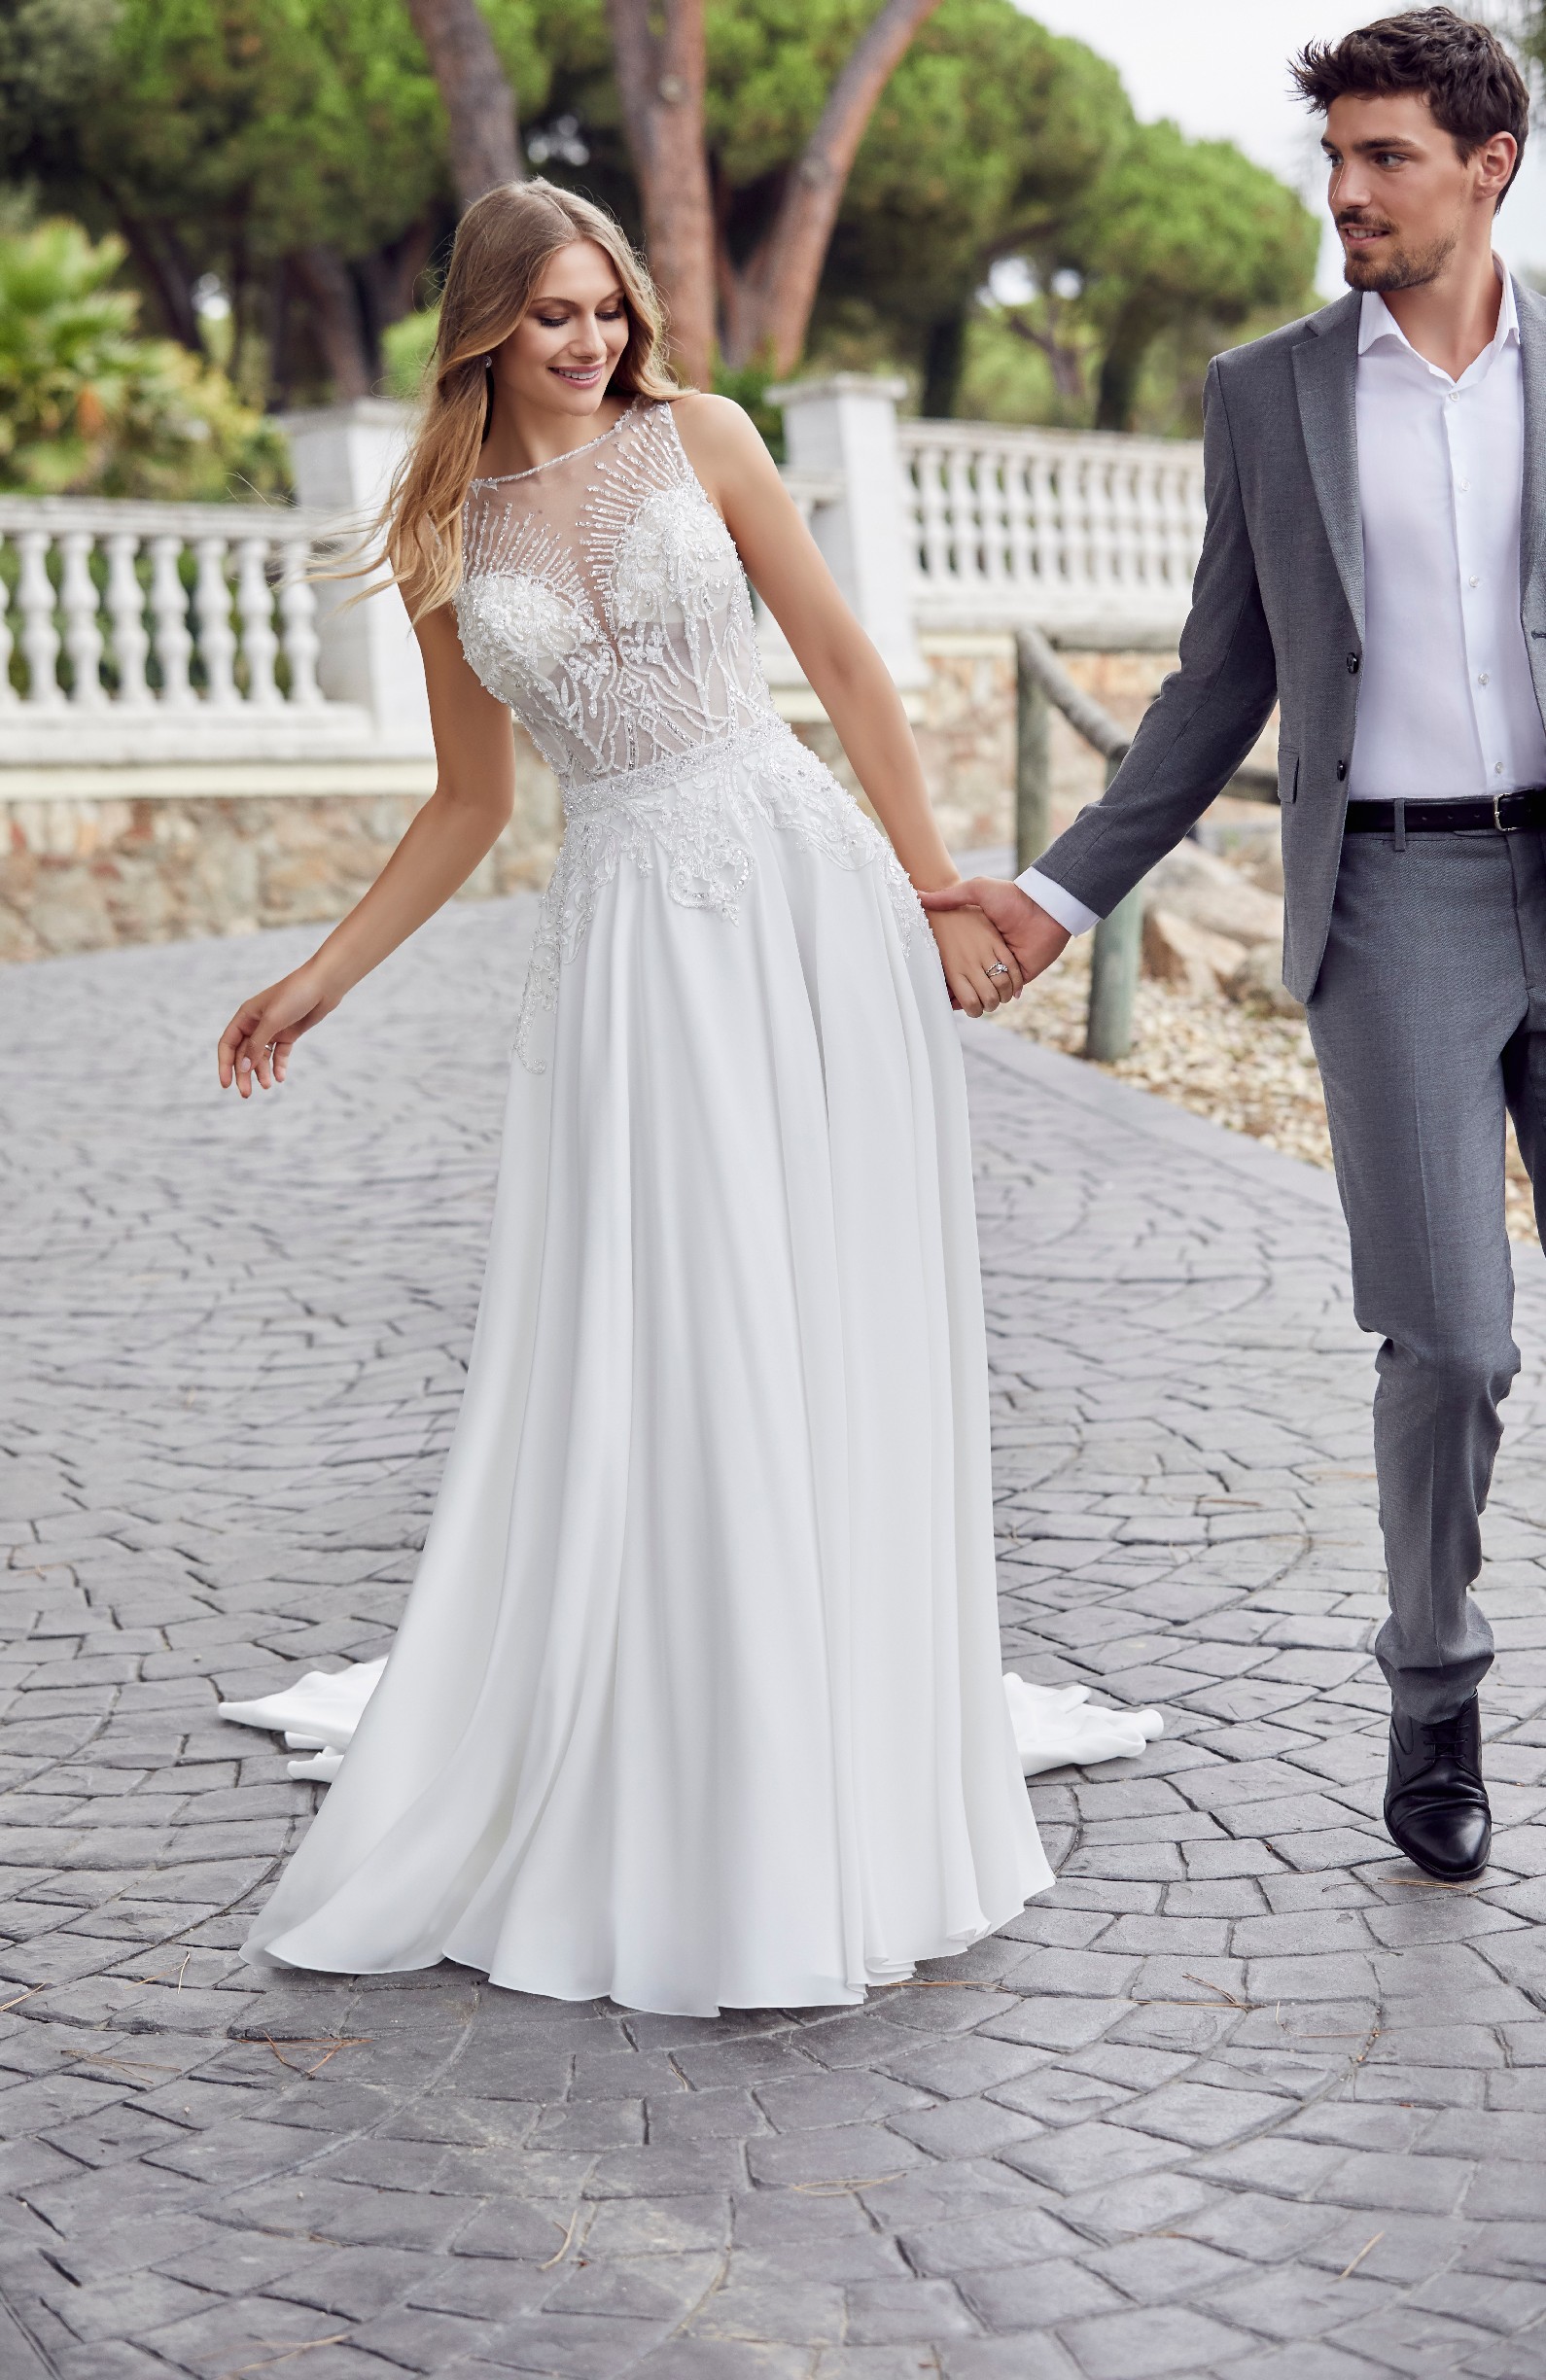 Woman and man walking outside holding hands while the woman wears beaded illusion bodice wedding dress with a-line skirt